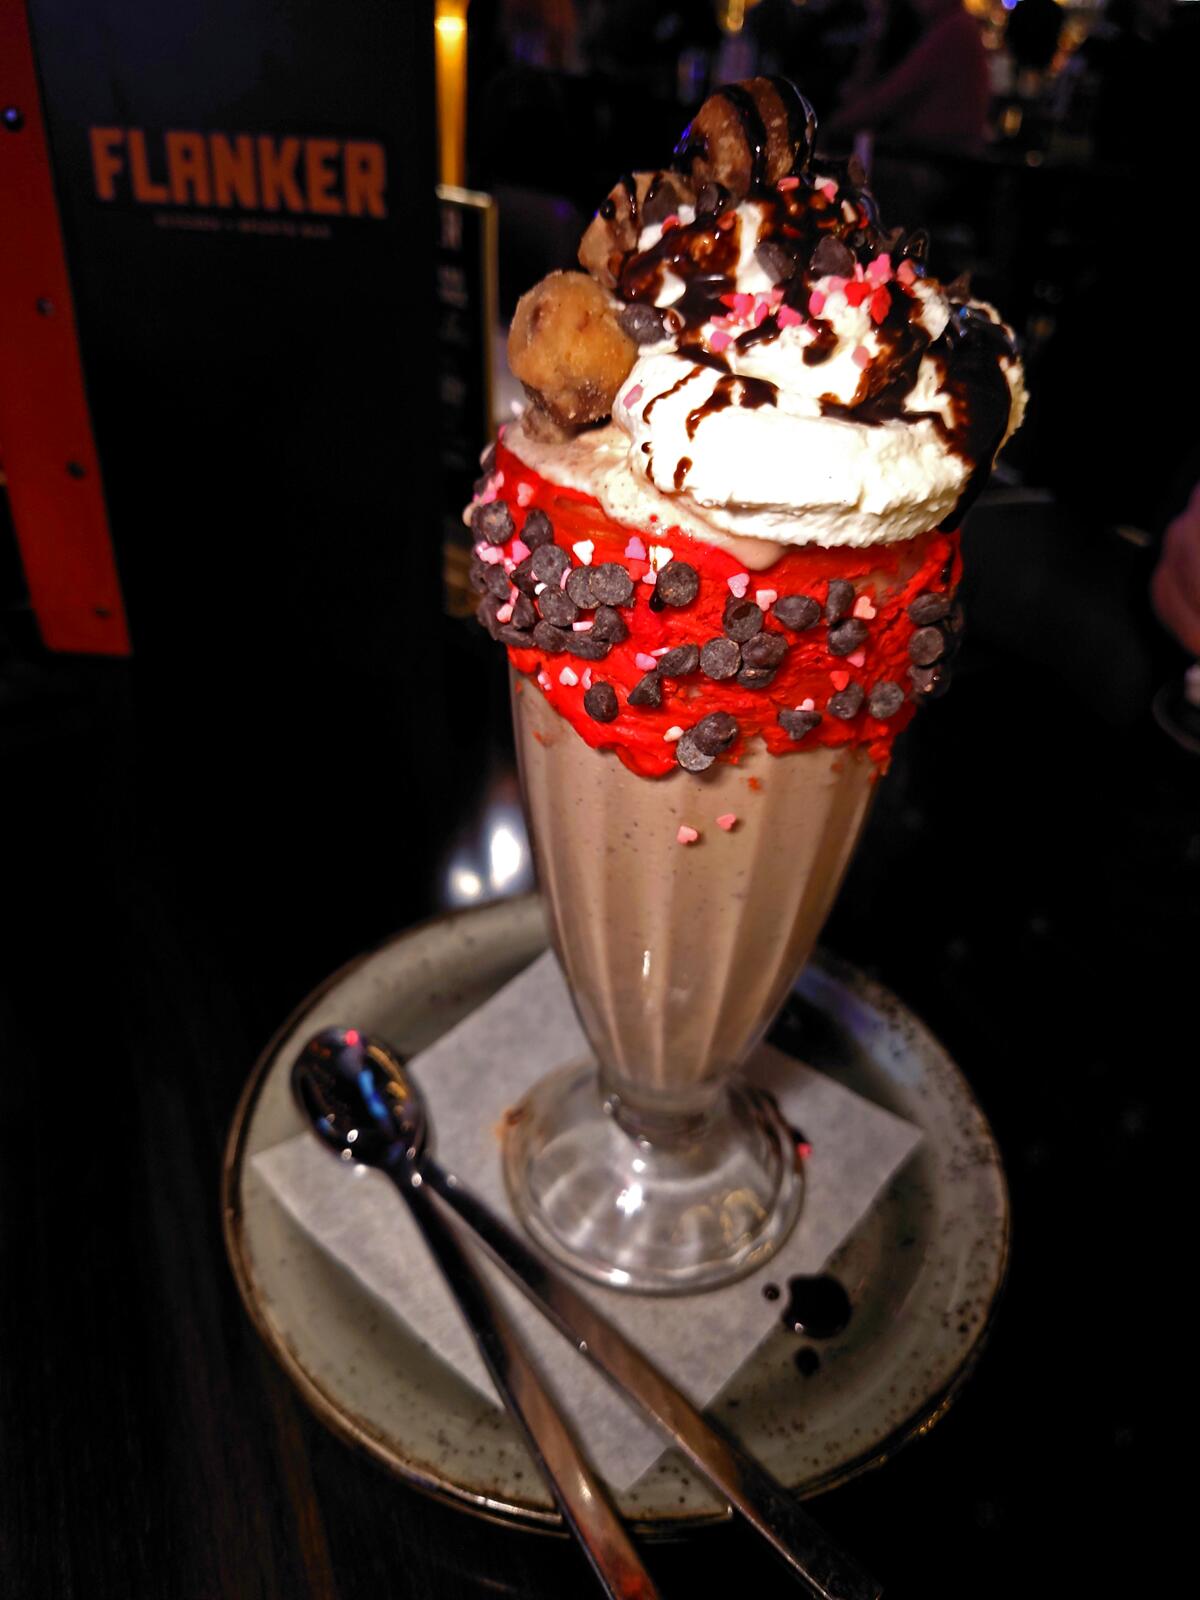 A milkshake with whipped cream and chocolate sauce on top